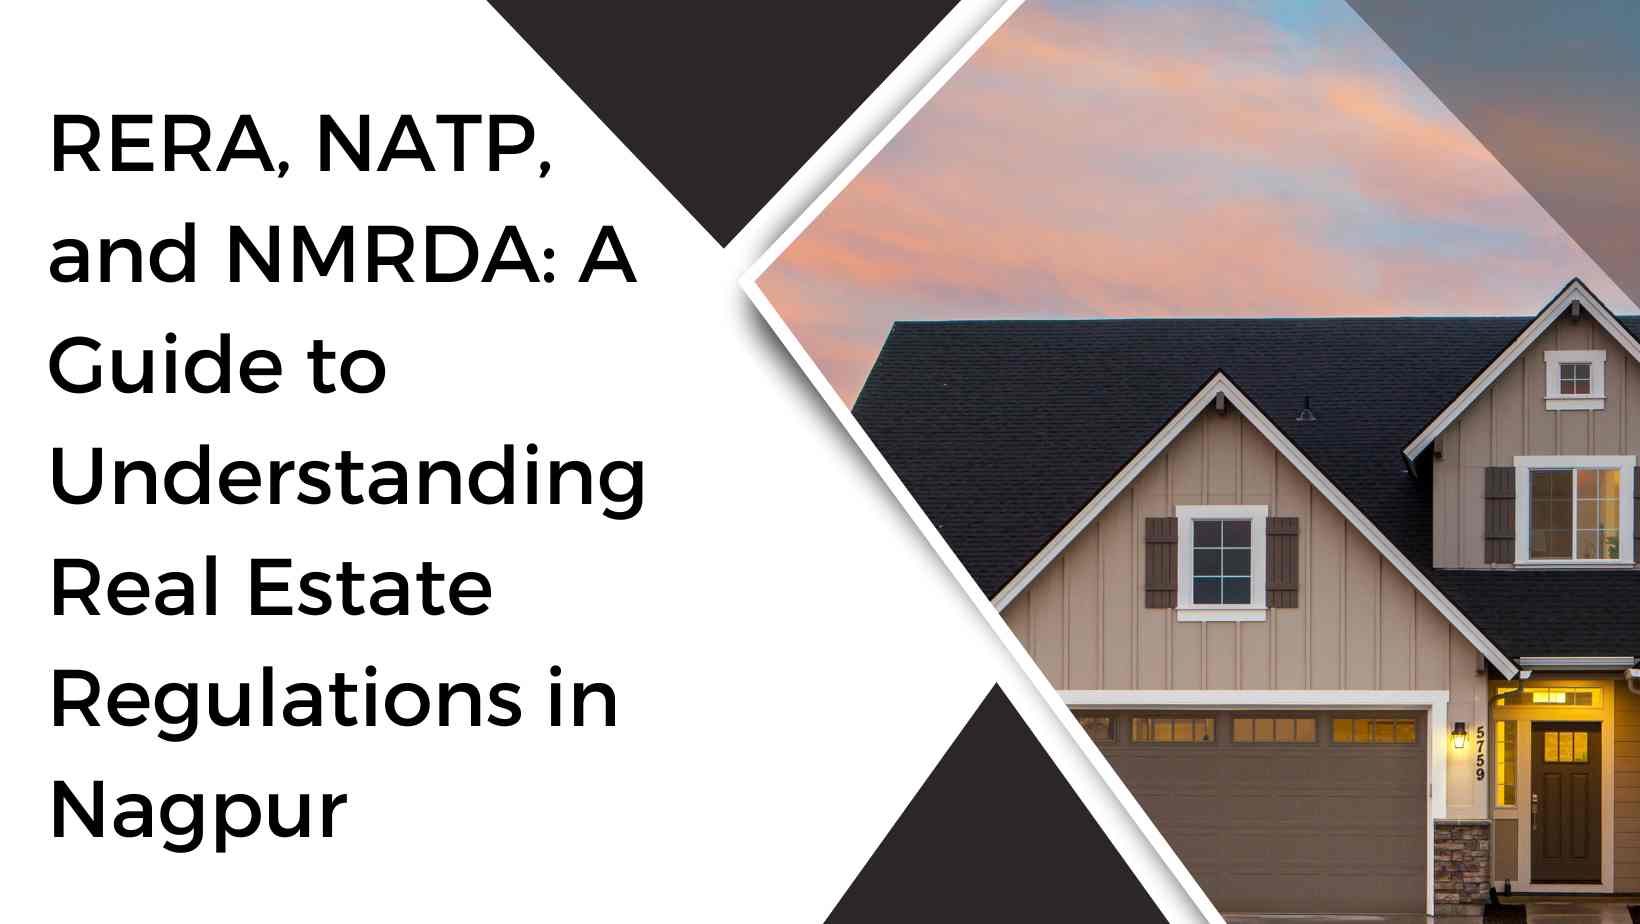 RERA, NATP, and NMRDA A Guide to Understanding Real Estate Regulations in Nagpur